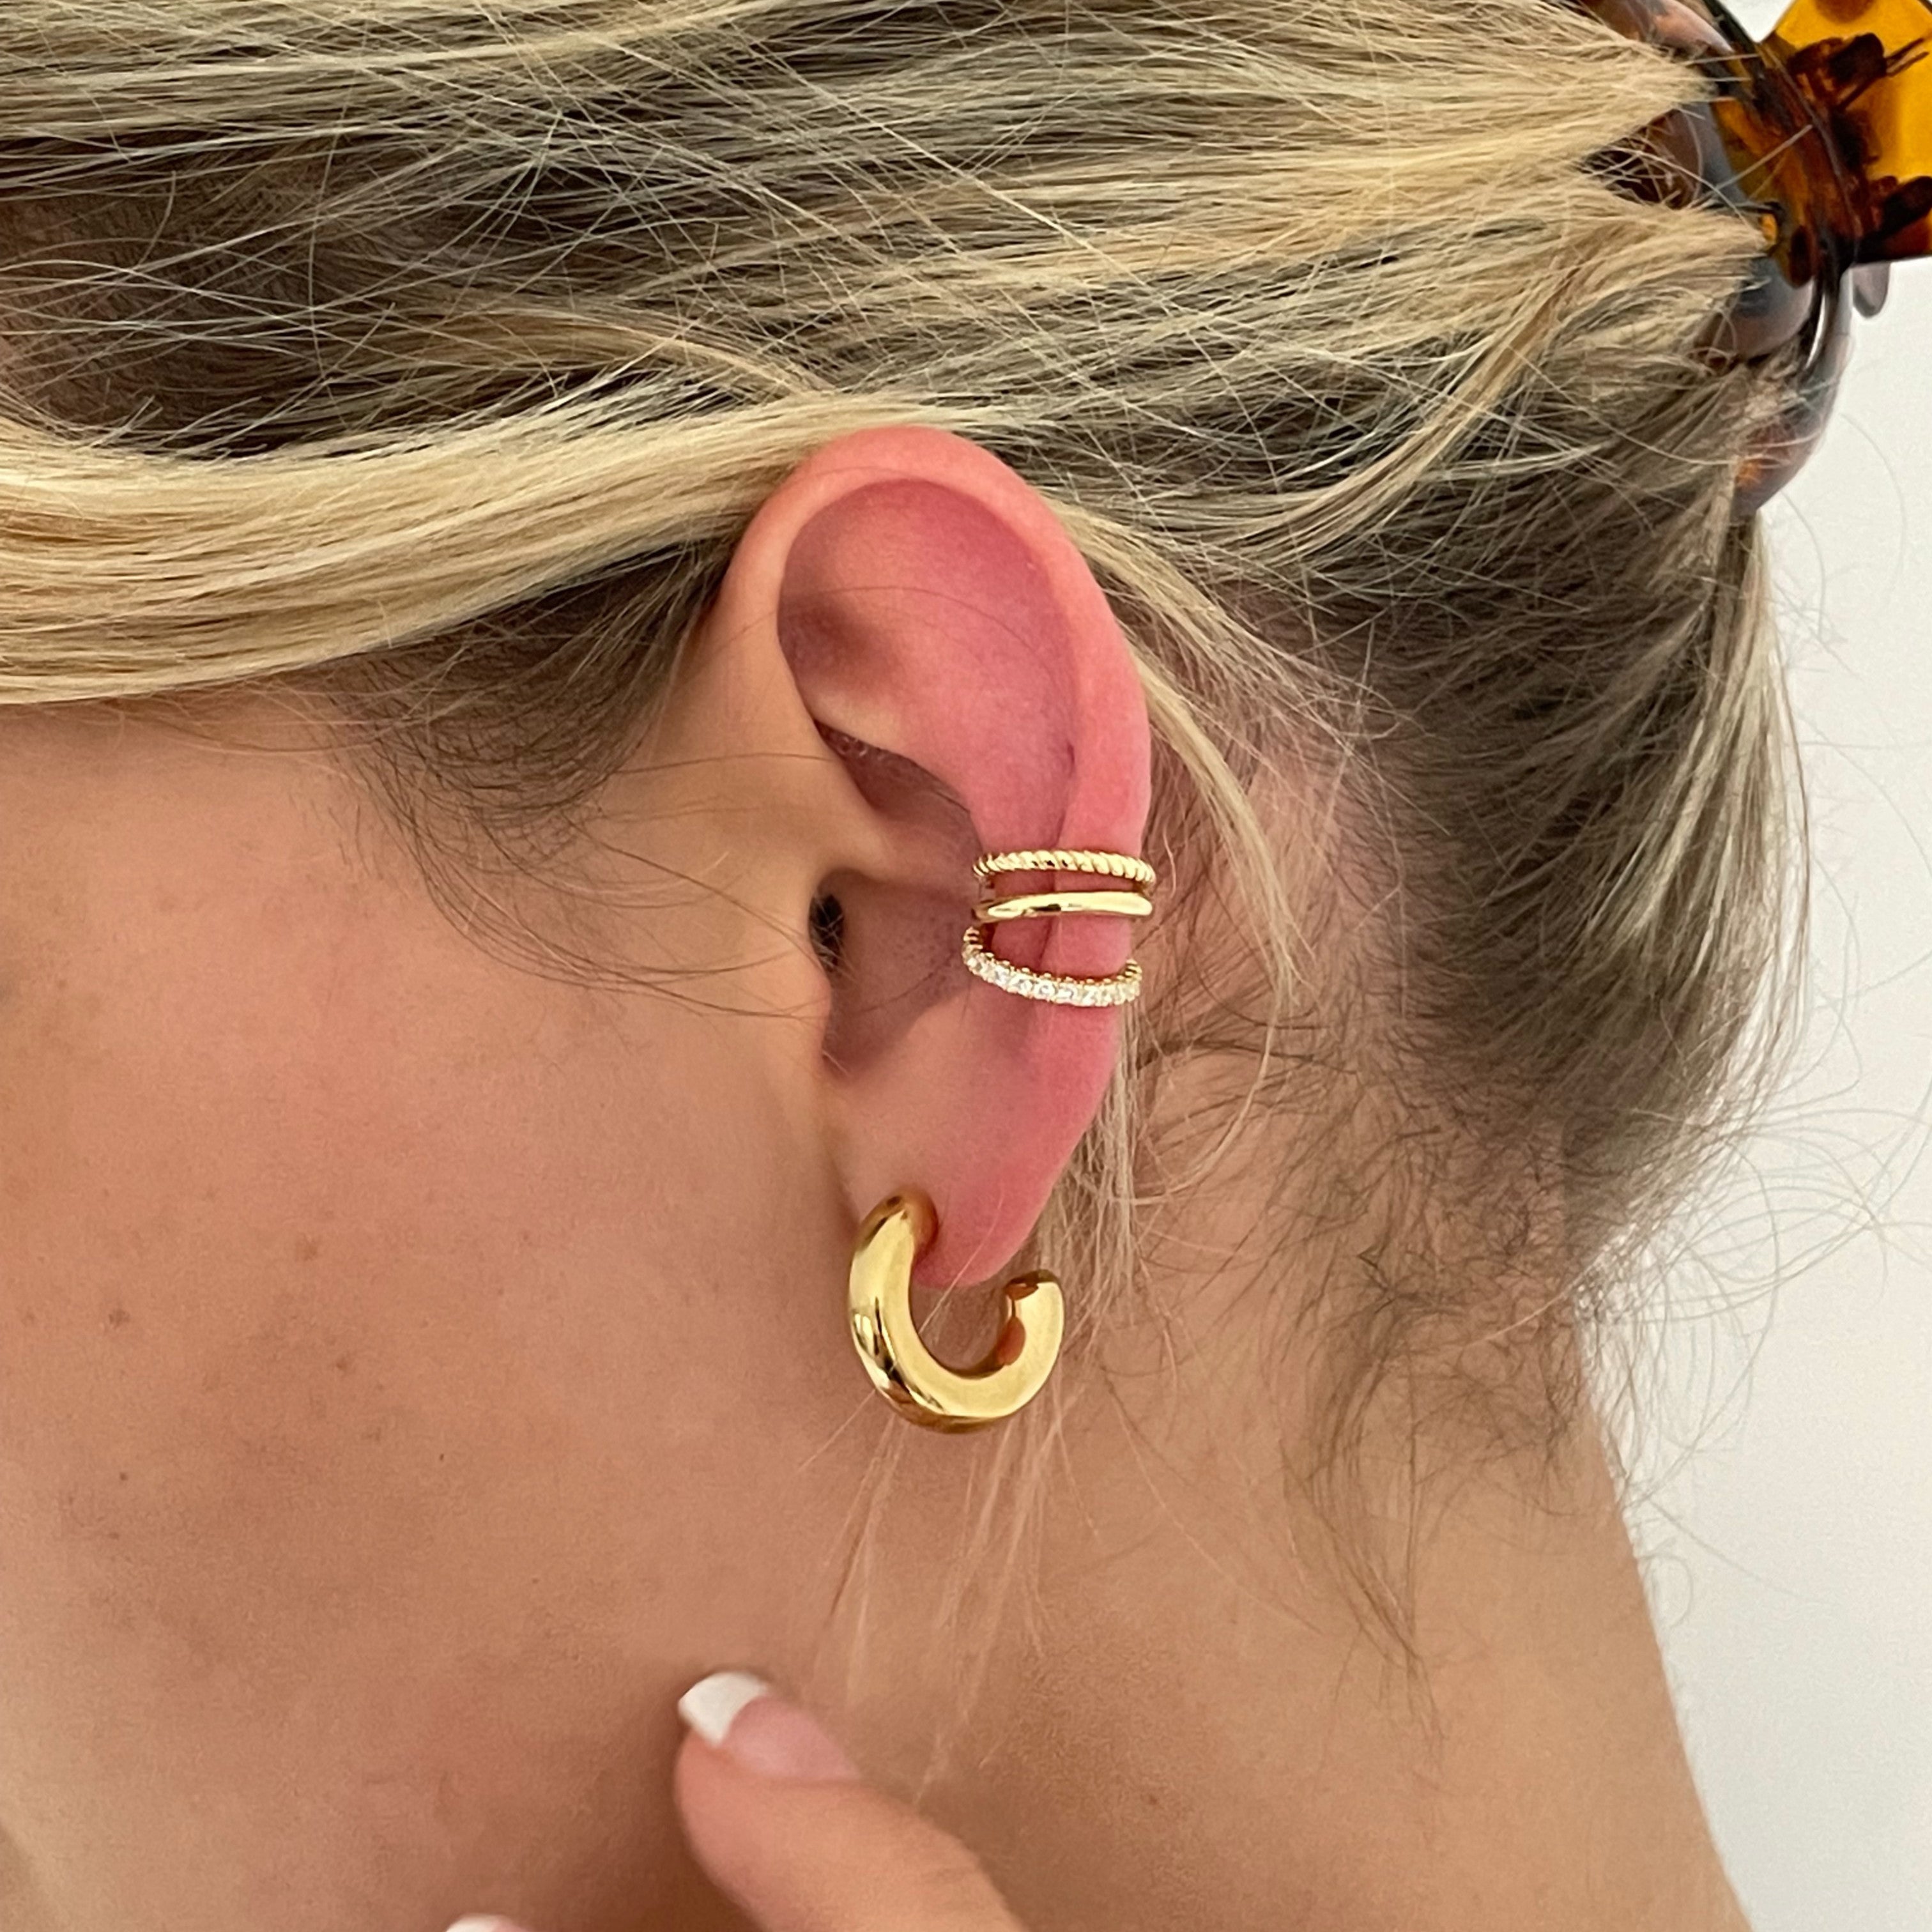 Small chunky gold hoop earrings, perfect for adding a touch of elegance to any outfit